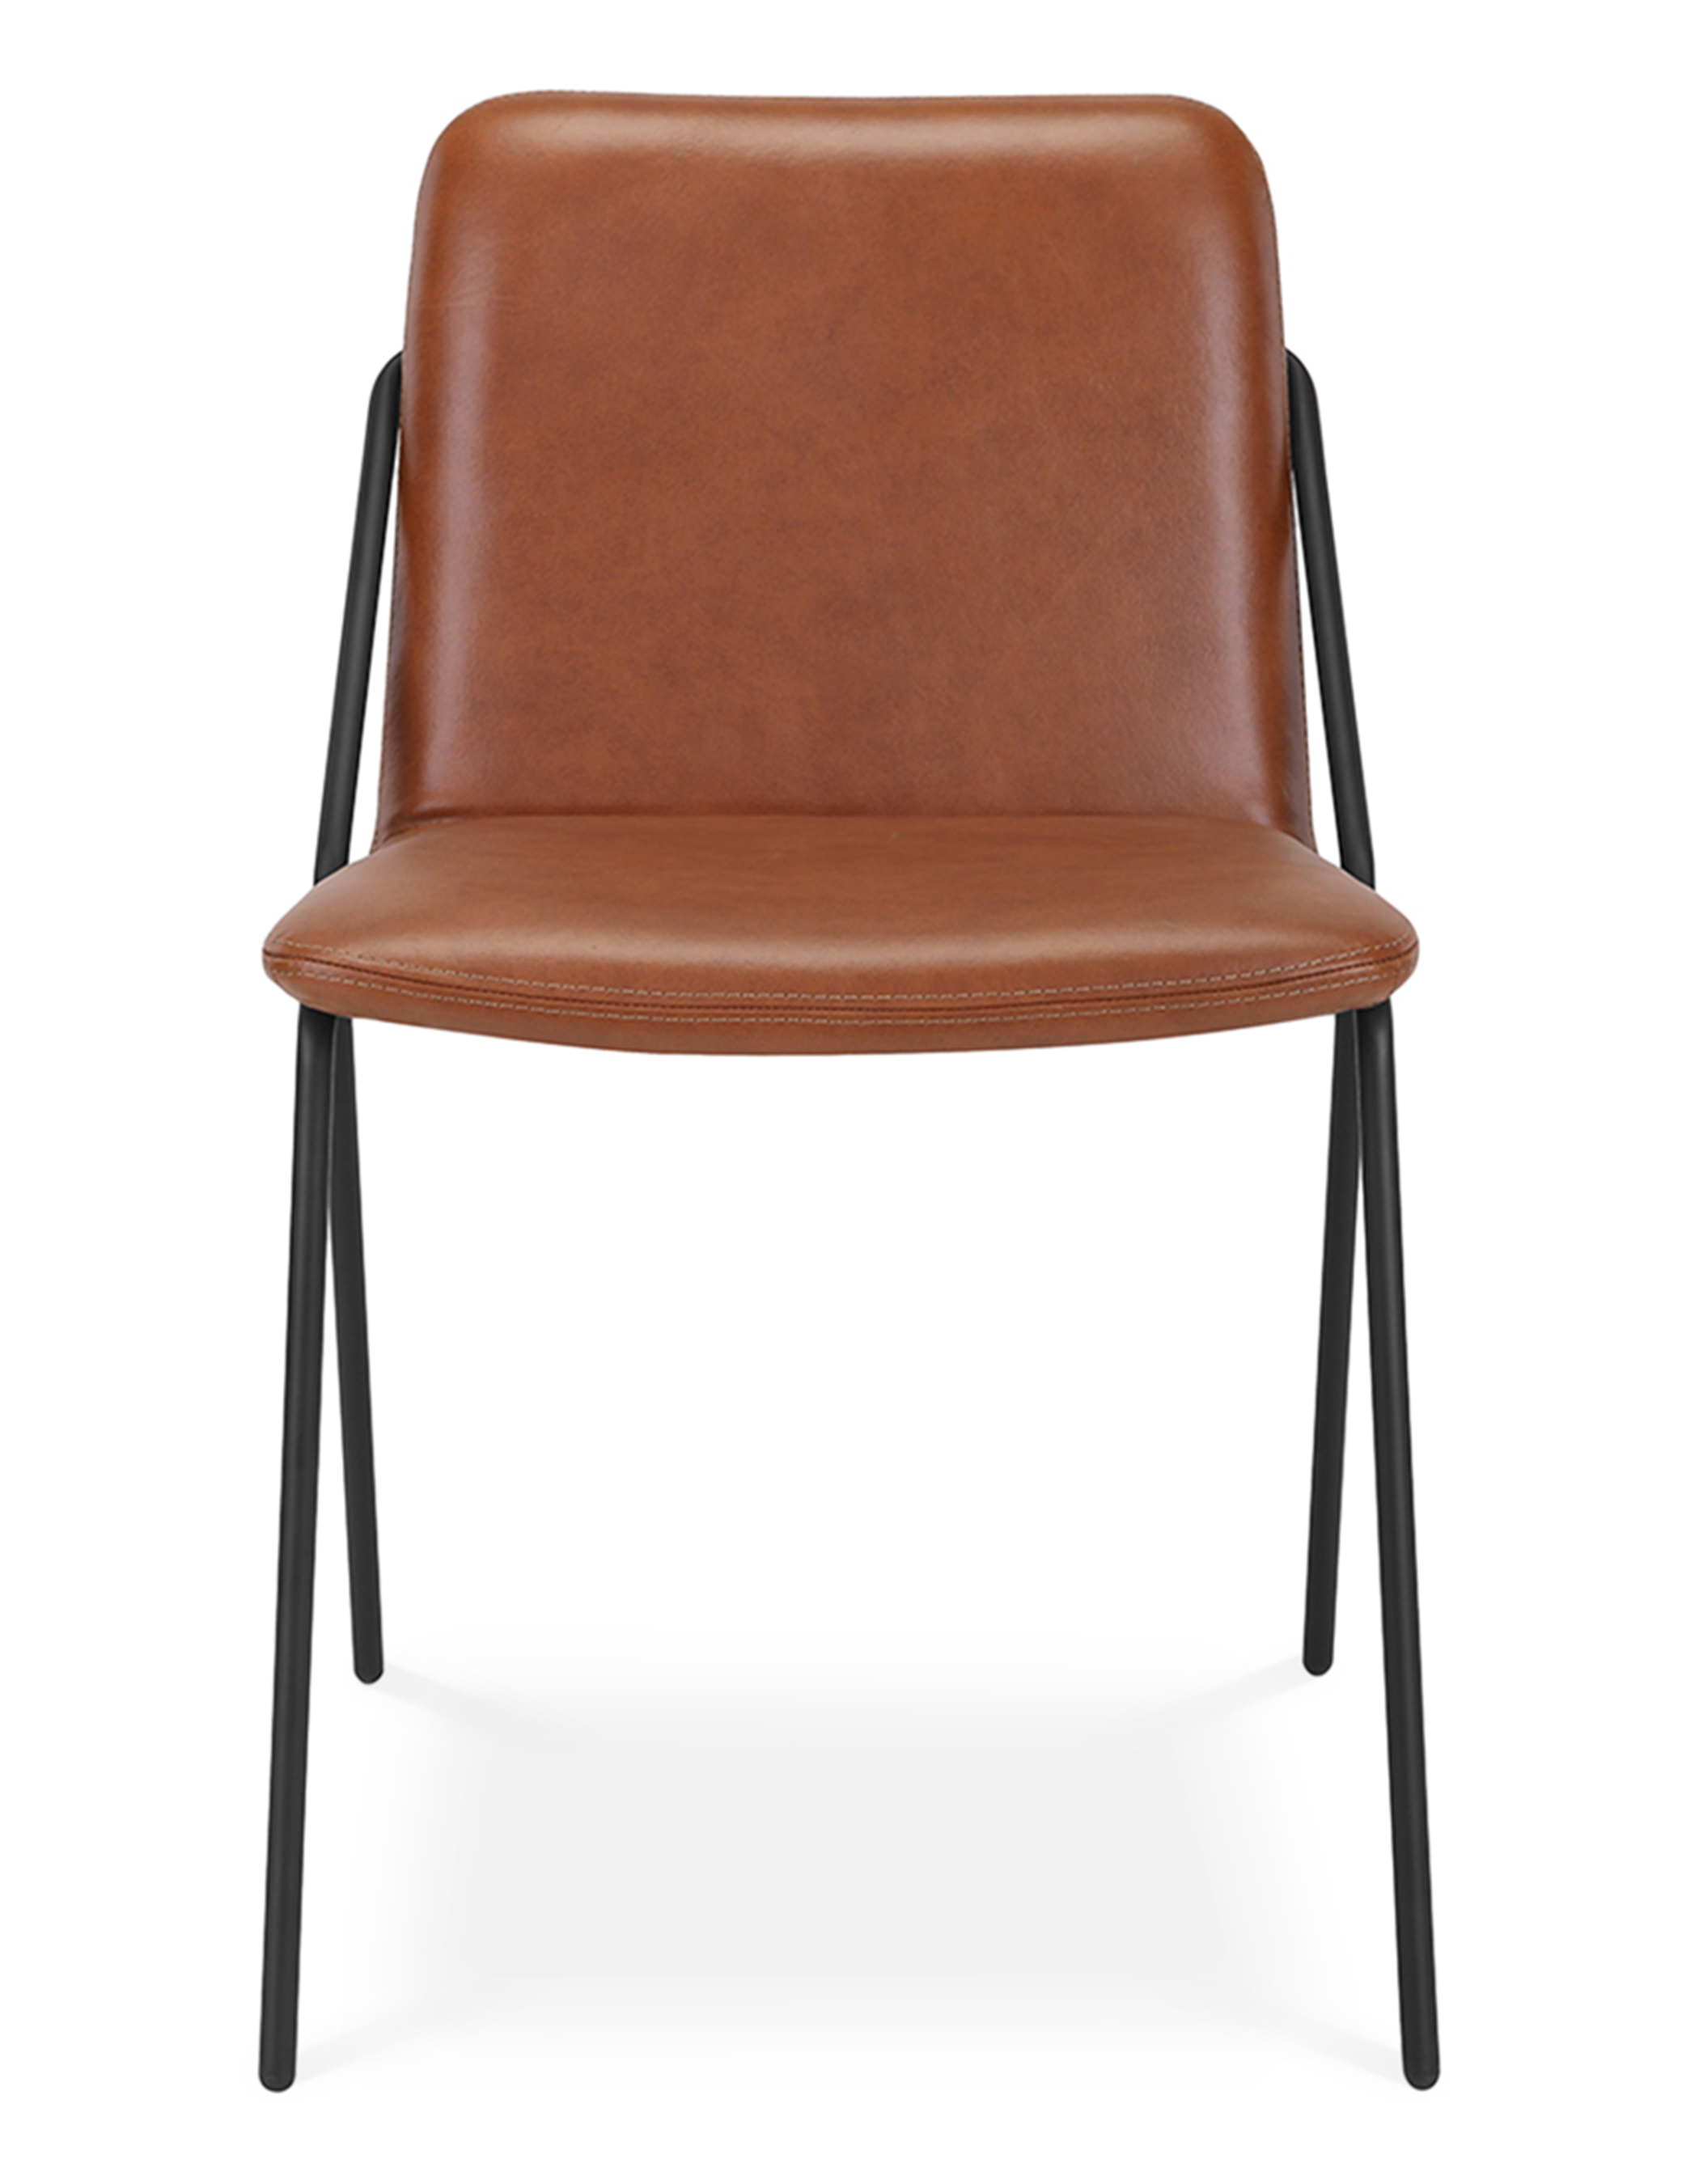 WS - Sling side chair - Upholstered PU leather (Front)